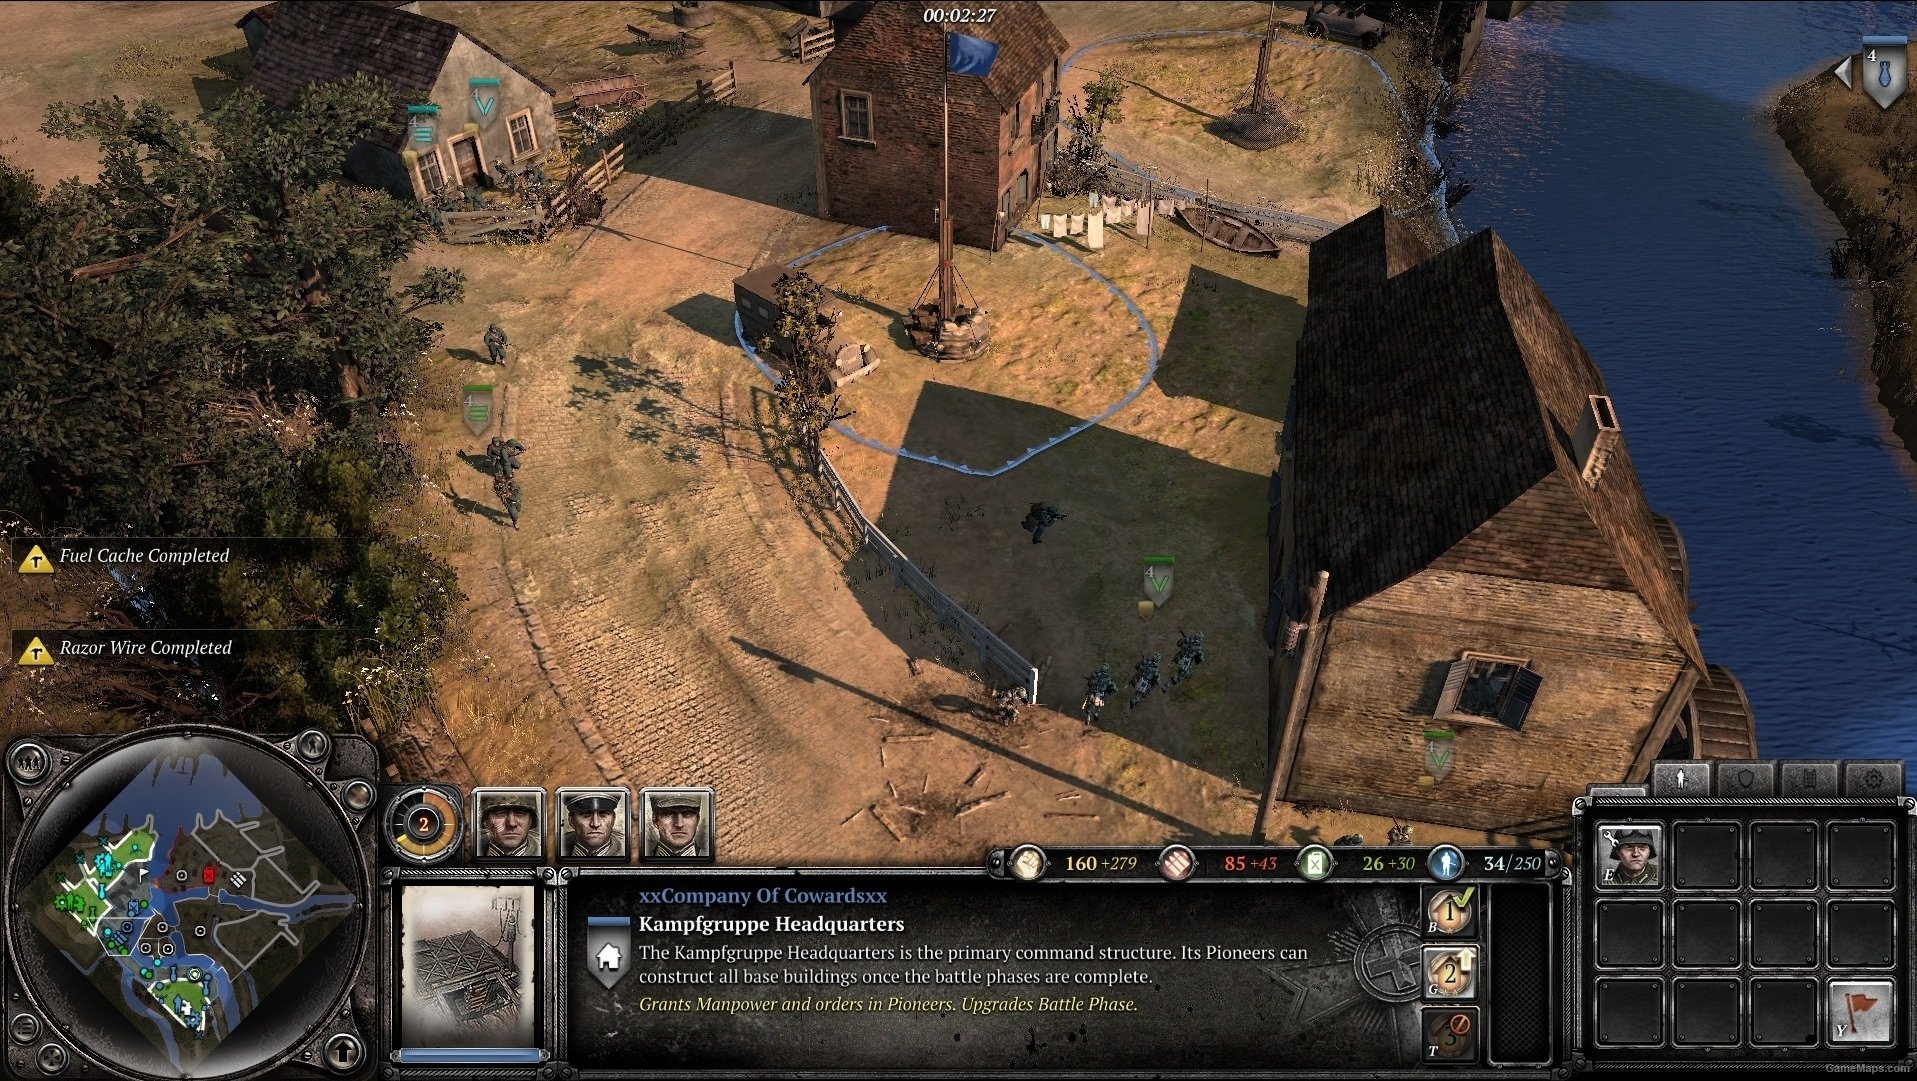 download free company of heroes 2 gameplay